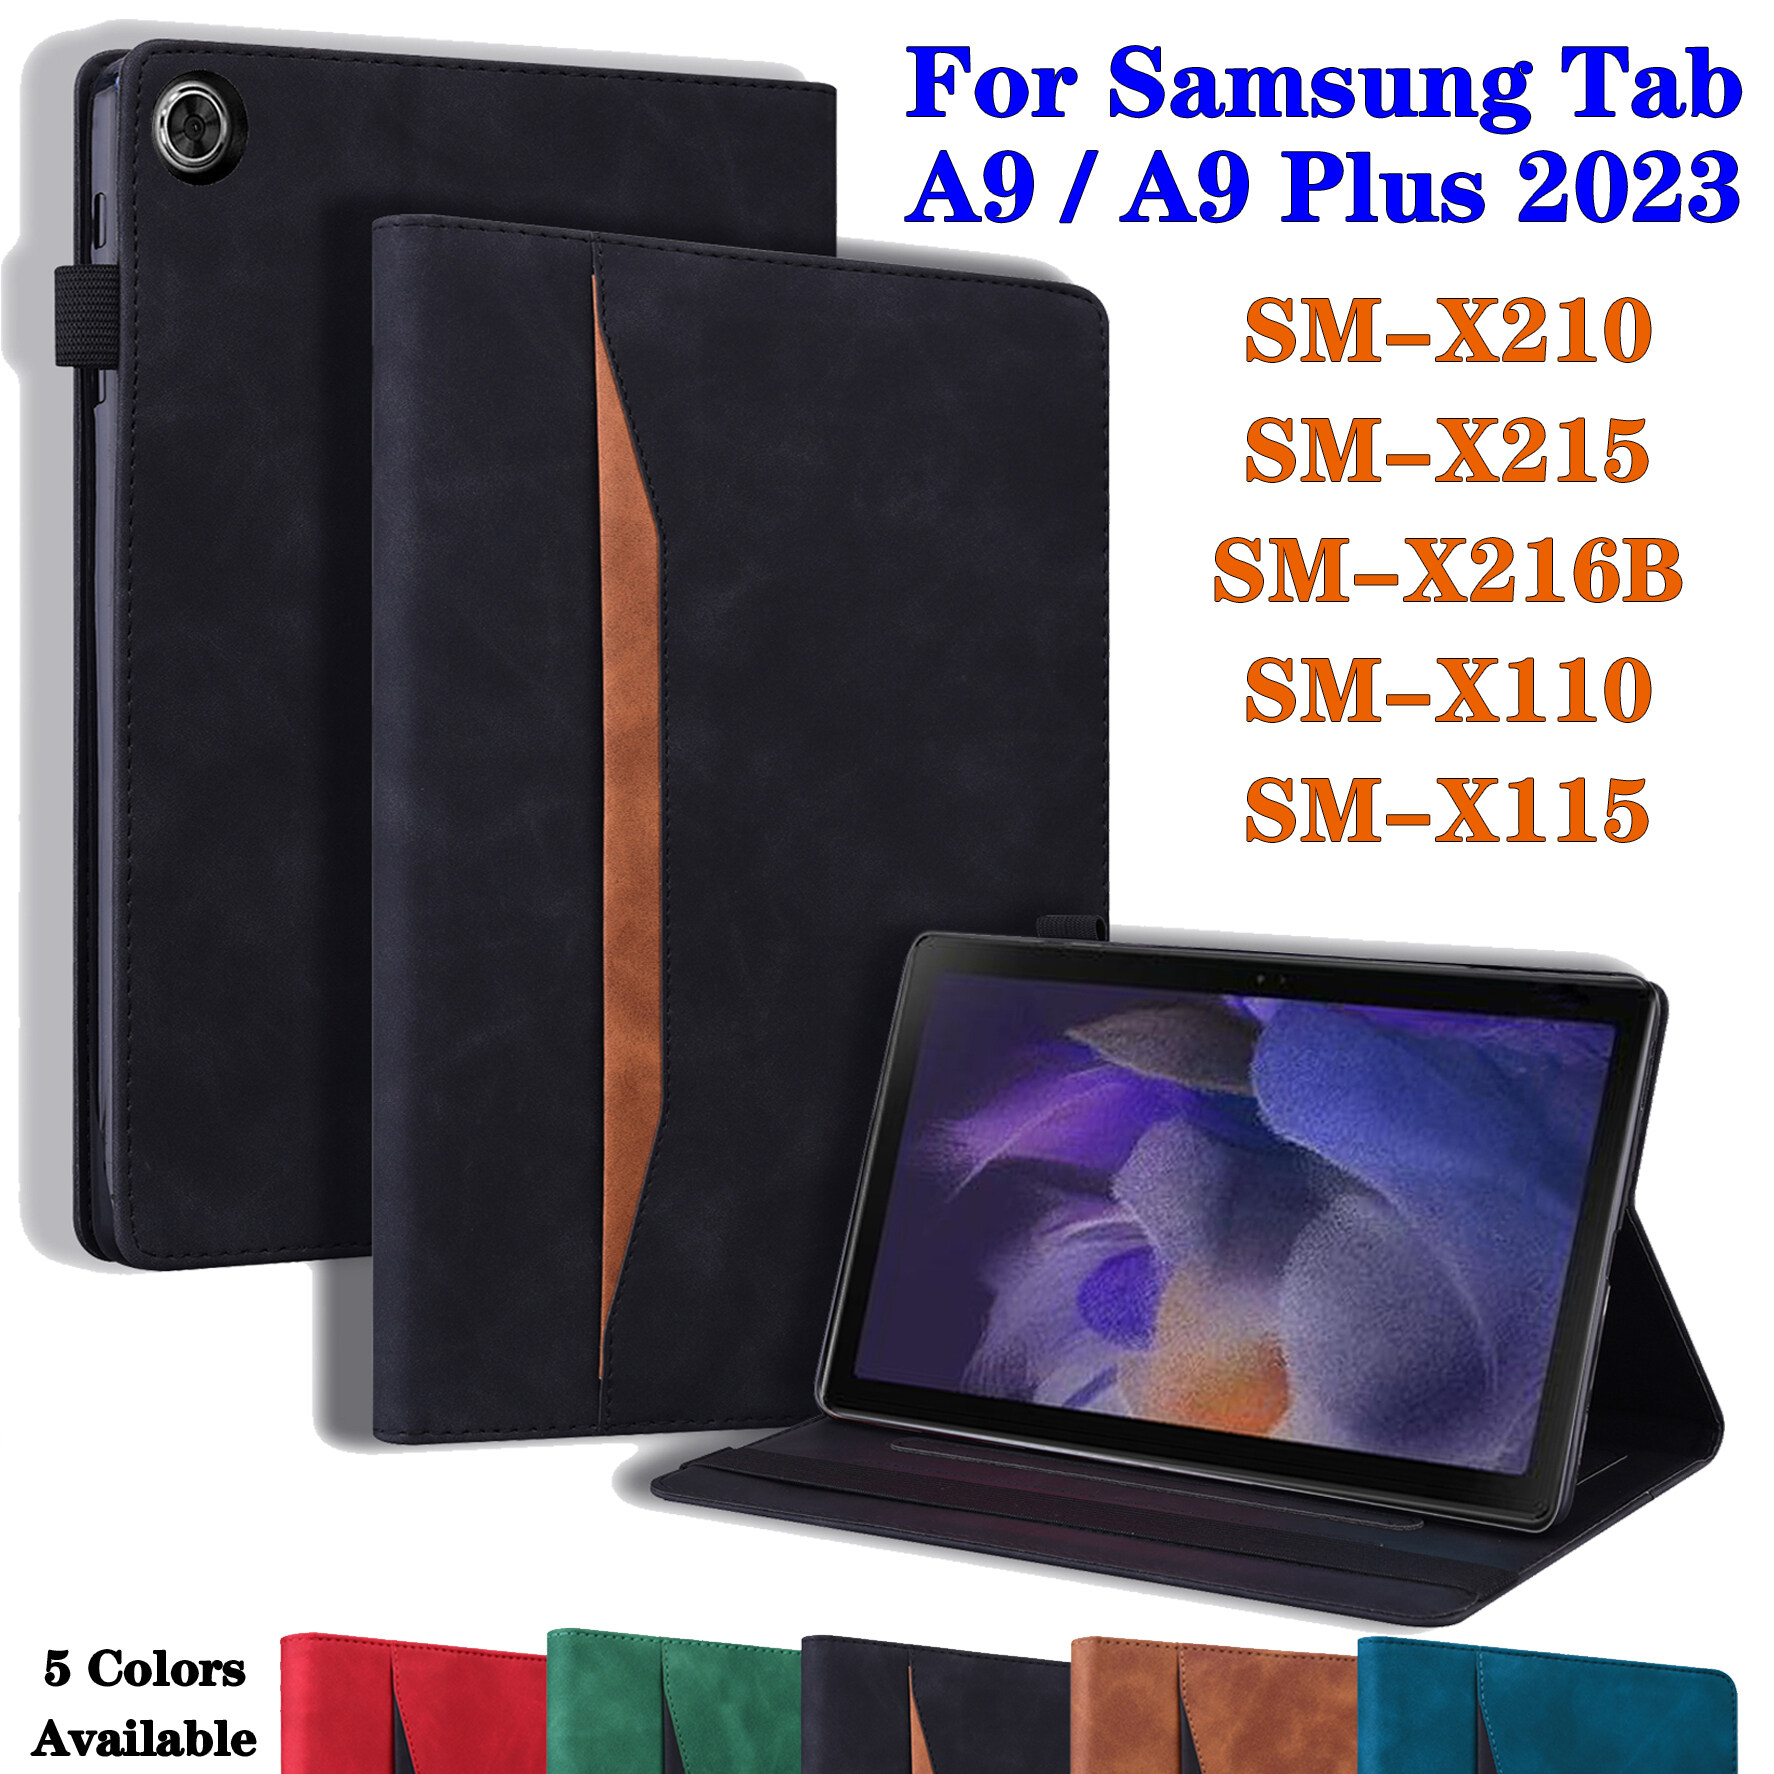 Case for Samsung Galaxy Tab A9 Plus 11 inch 2023 Model (SM-X210/X215/X216)  PU Leather Slim Lightweight Multiple Angles Stand Smart Cover with Auto